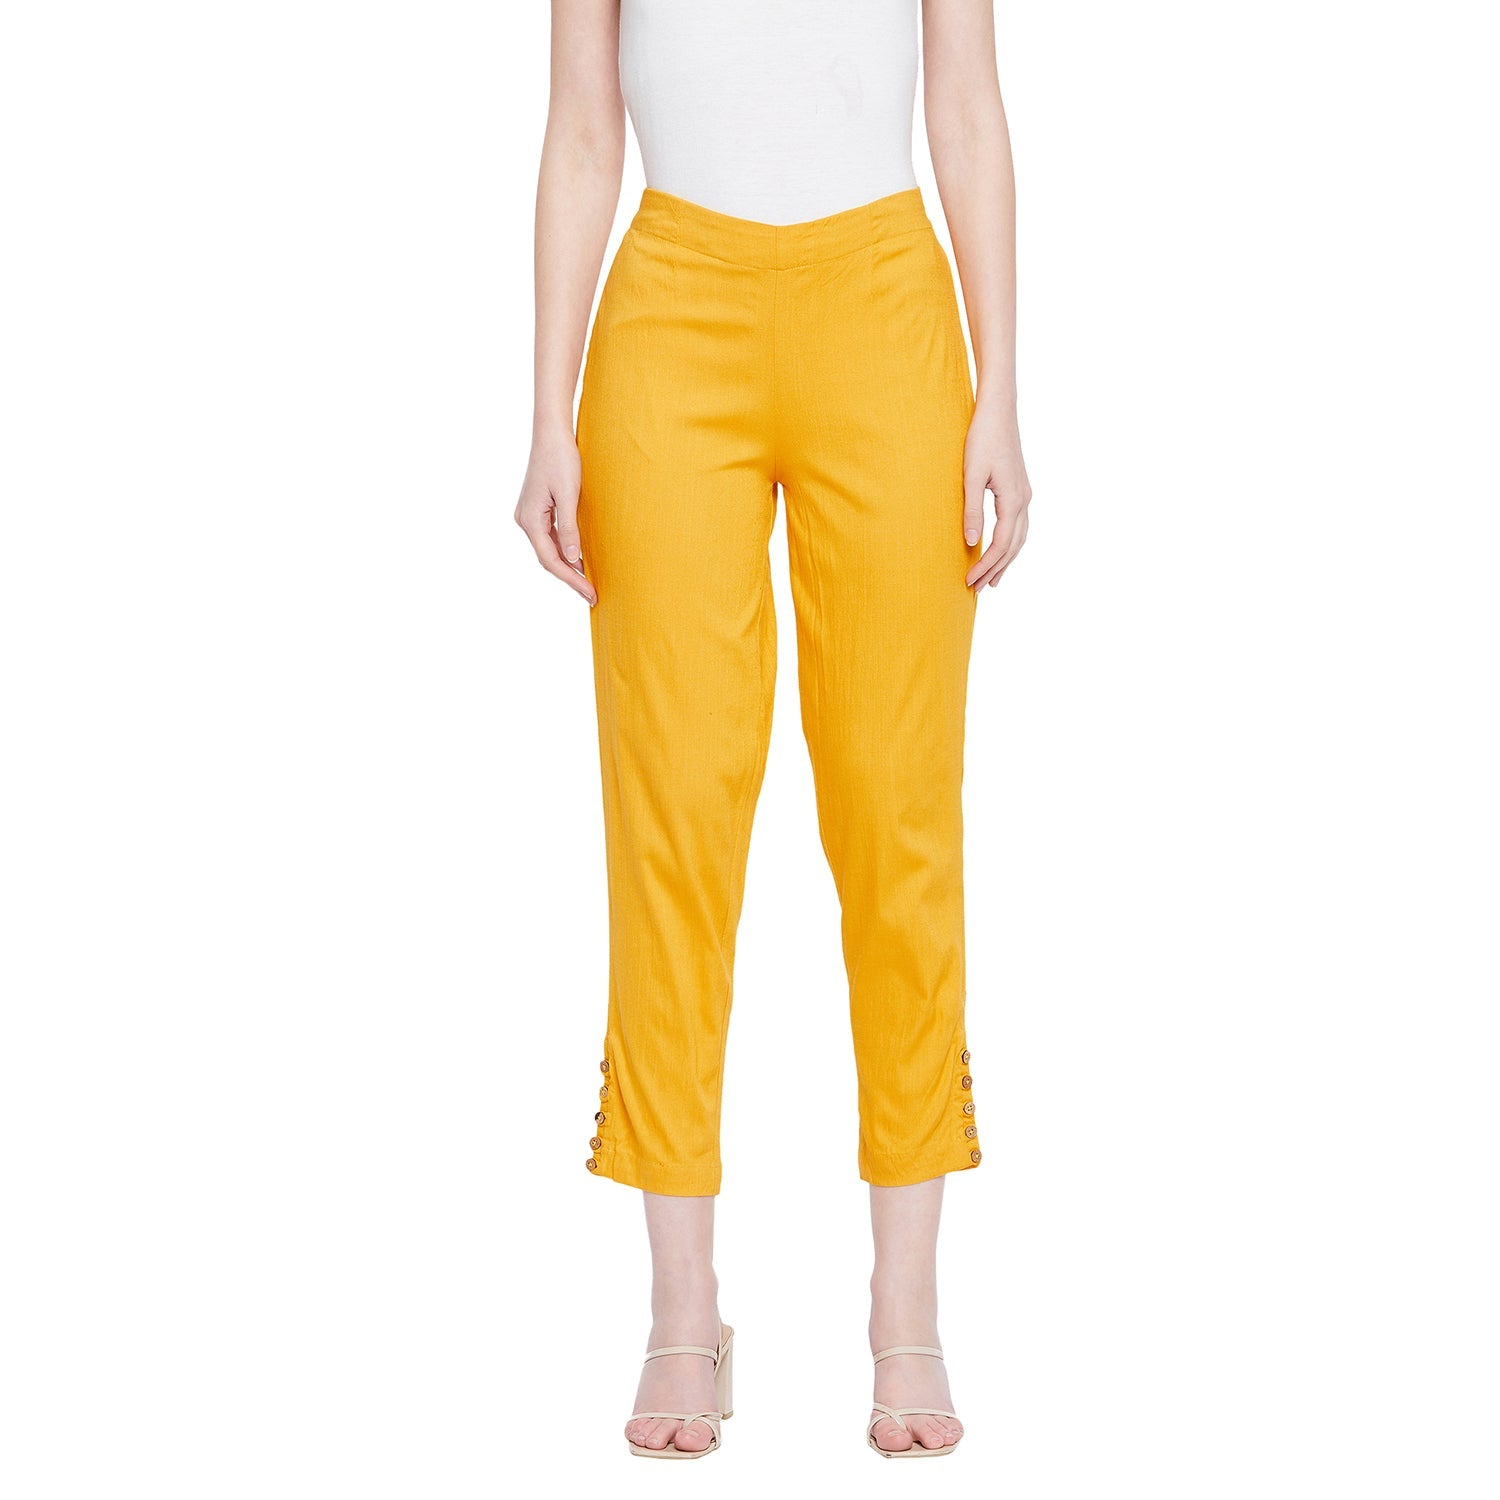 Shop Prisma's Honey Ankle Leggings for Comfort and Style